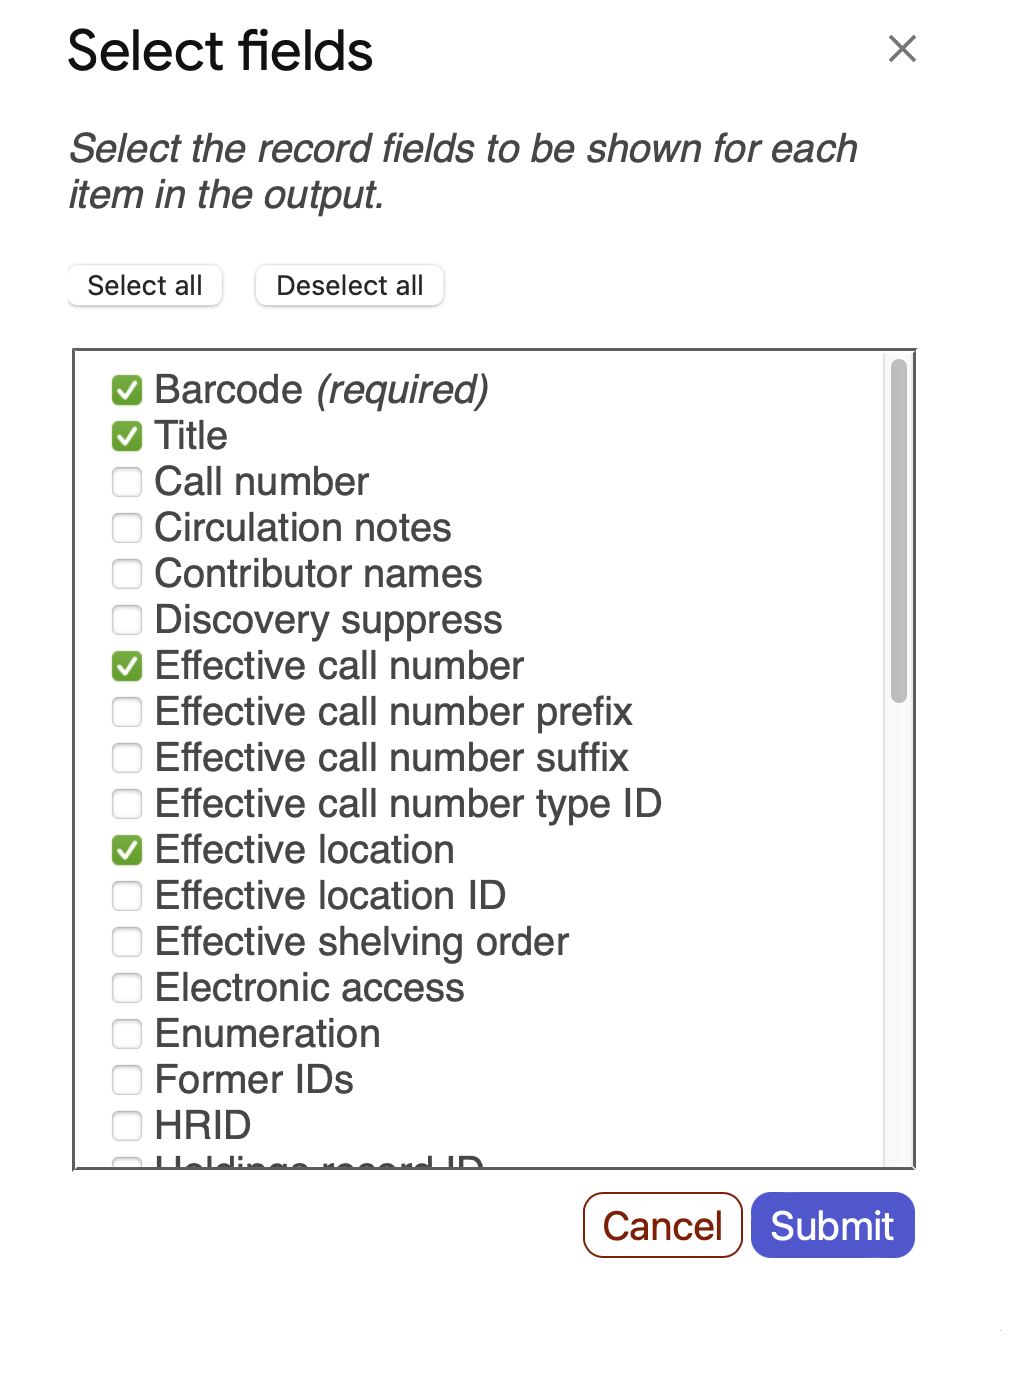 The dialog for selecting the record fields to show in the output spreadsheets